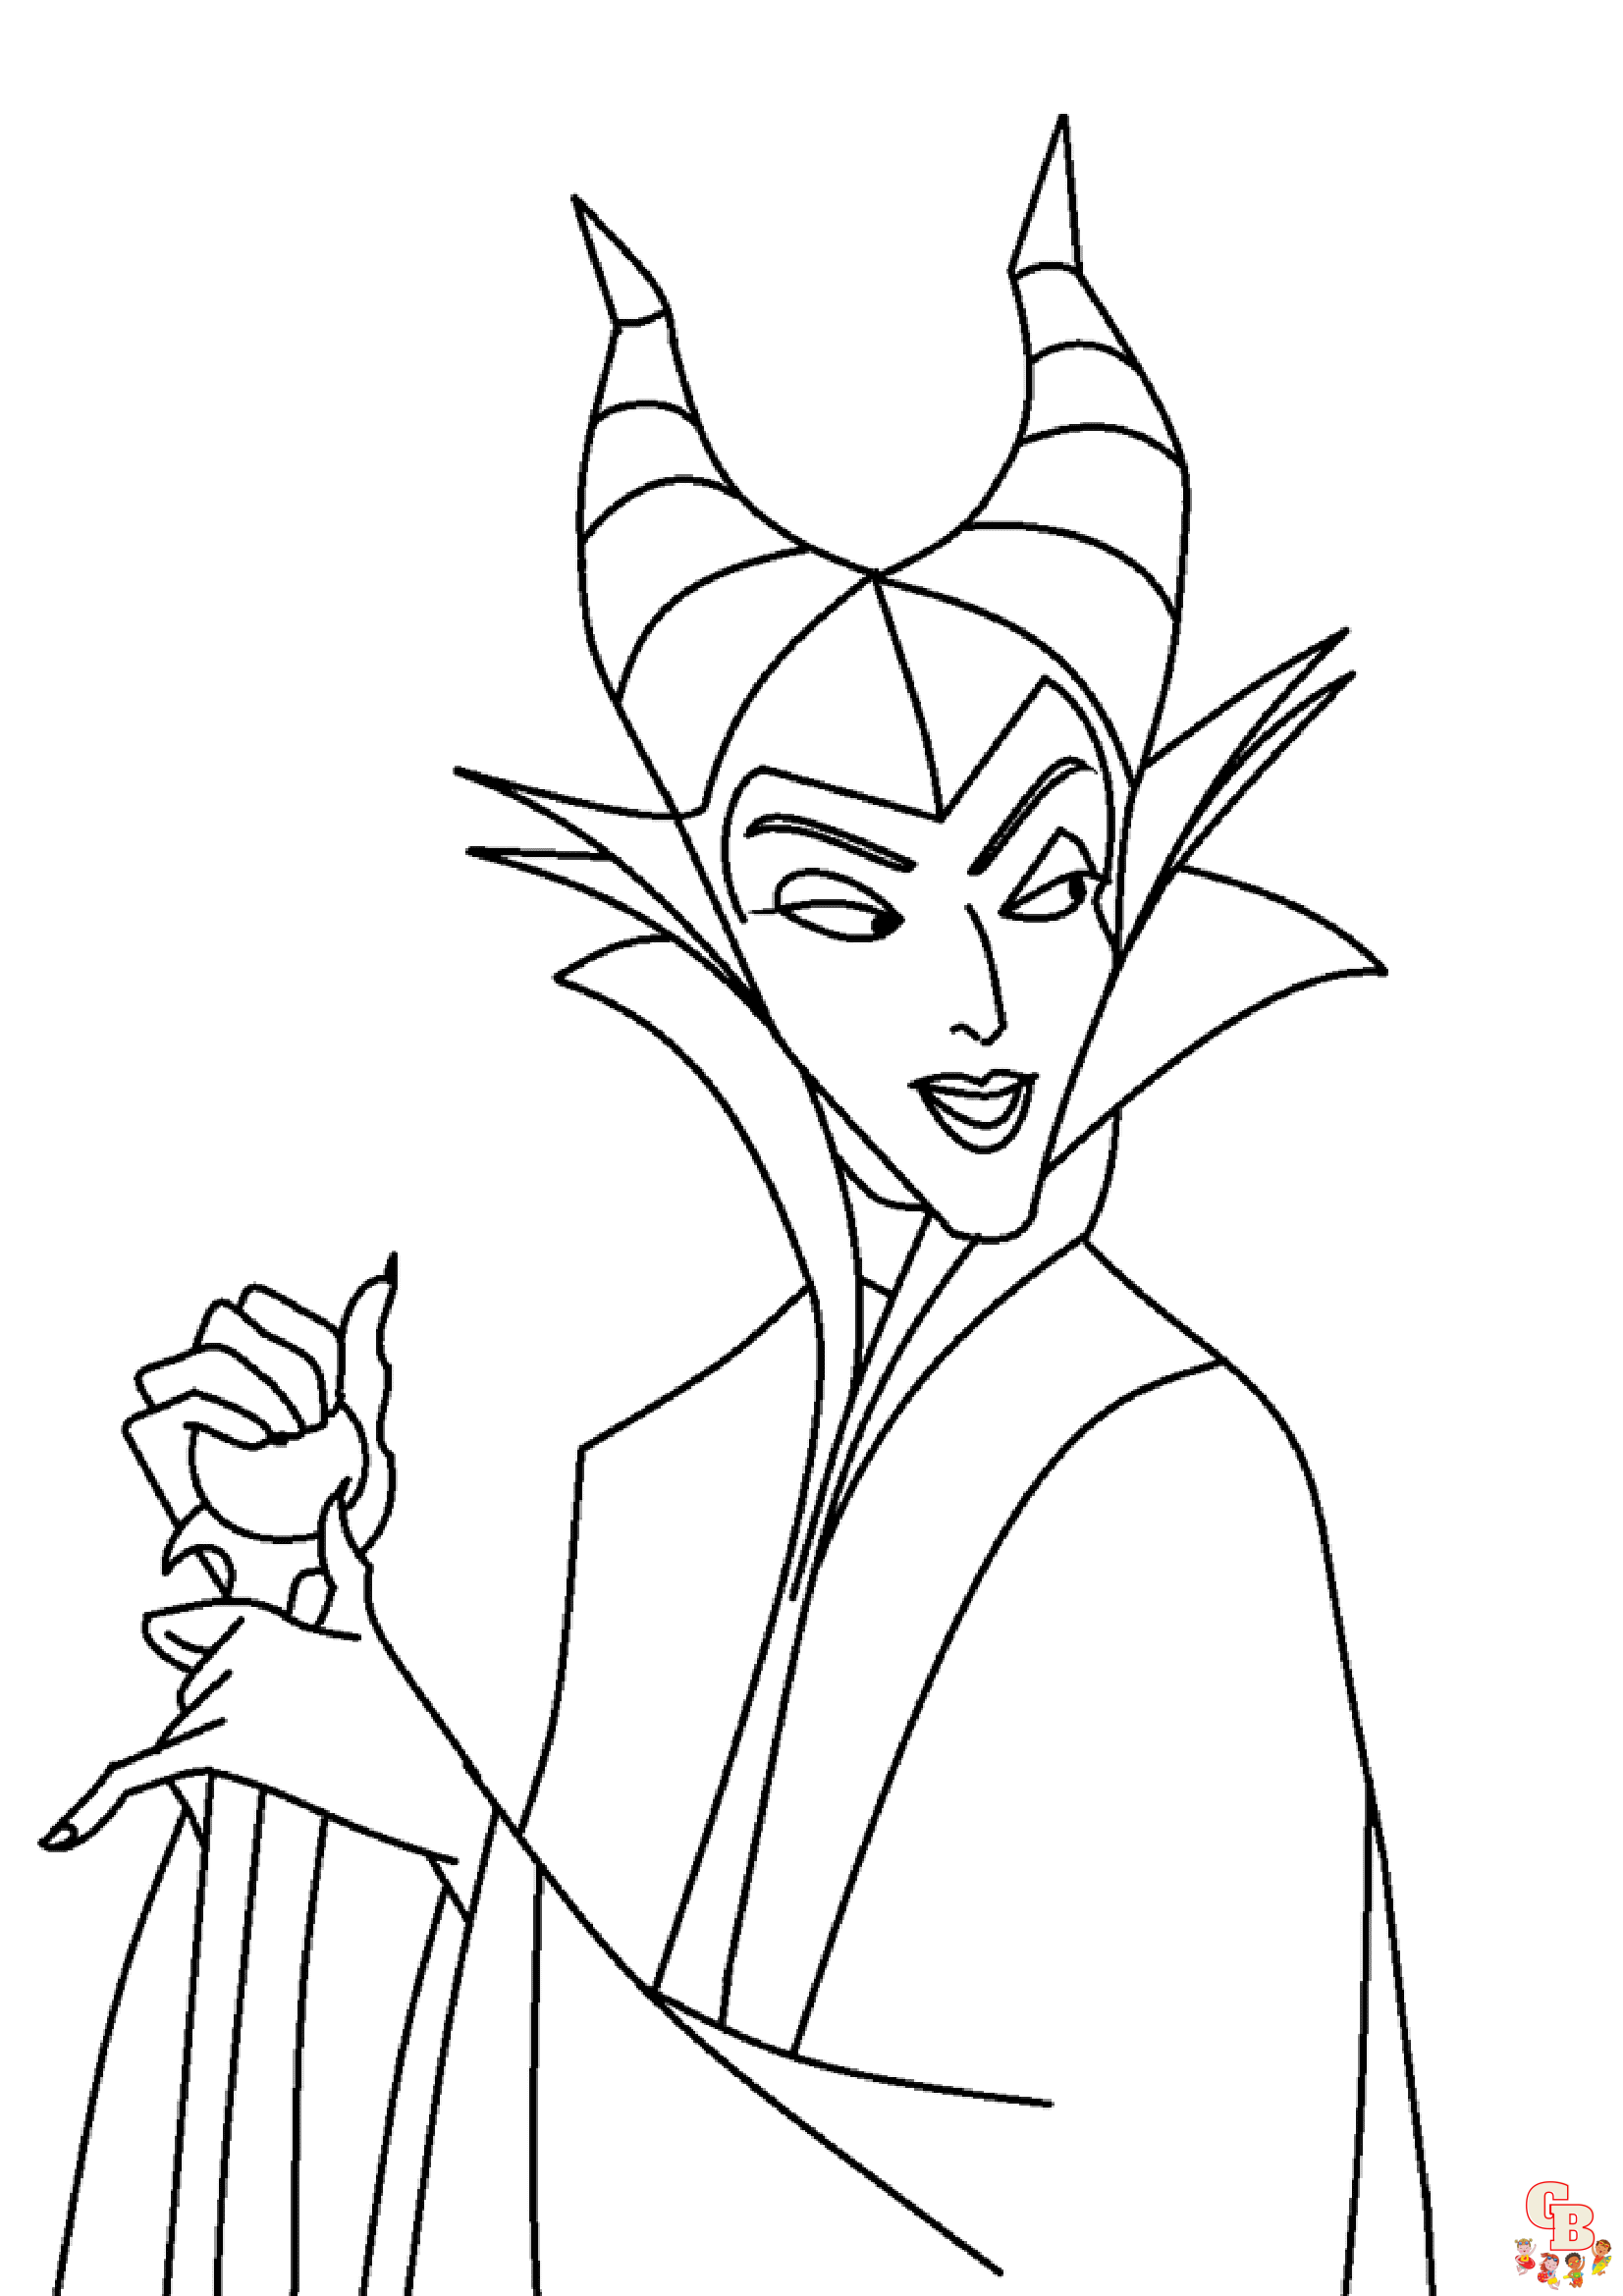 maleficent dragon coloring pages